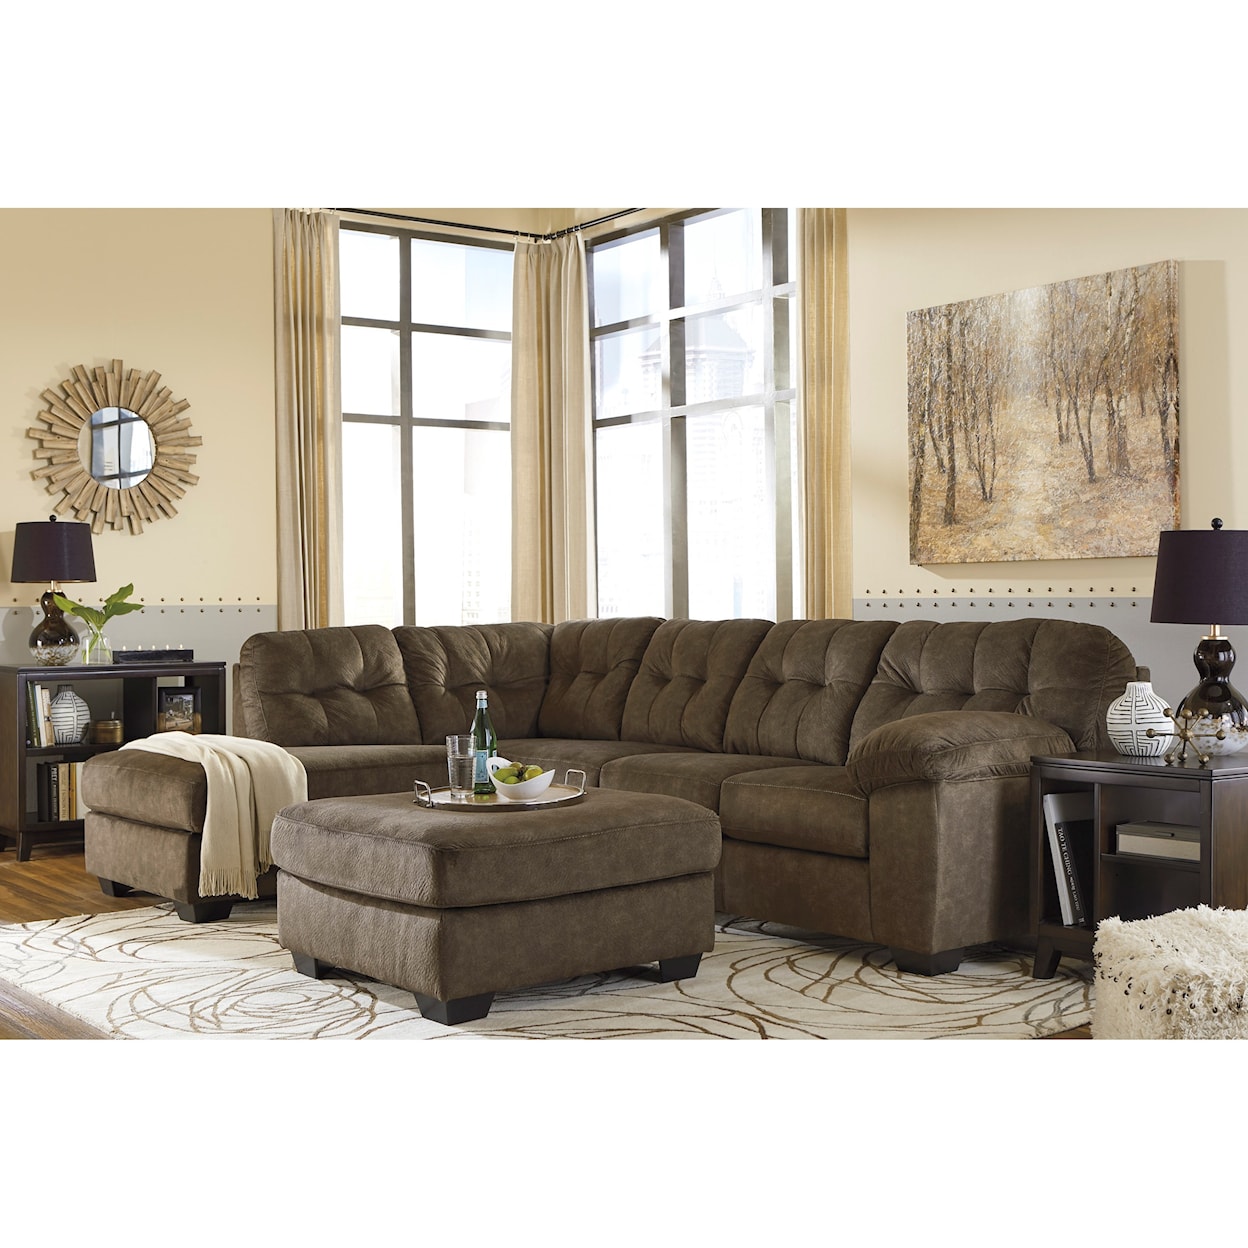 Signature Design by Ashley Accrington Sectional with Left Chaise & Queen Sleeper